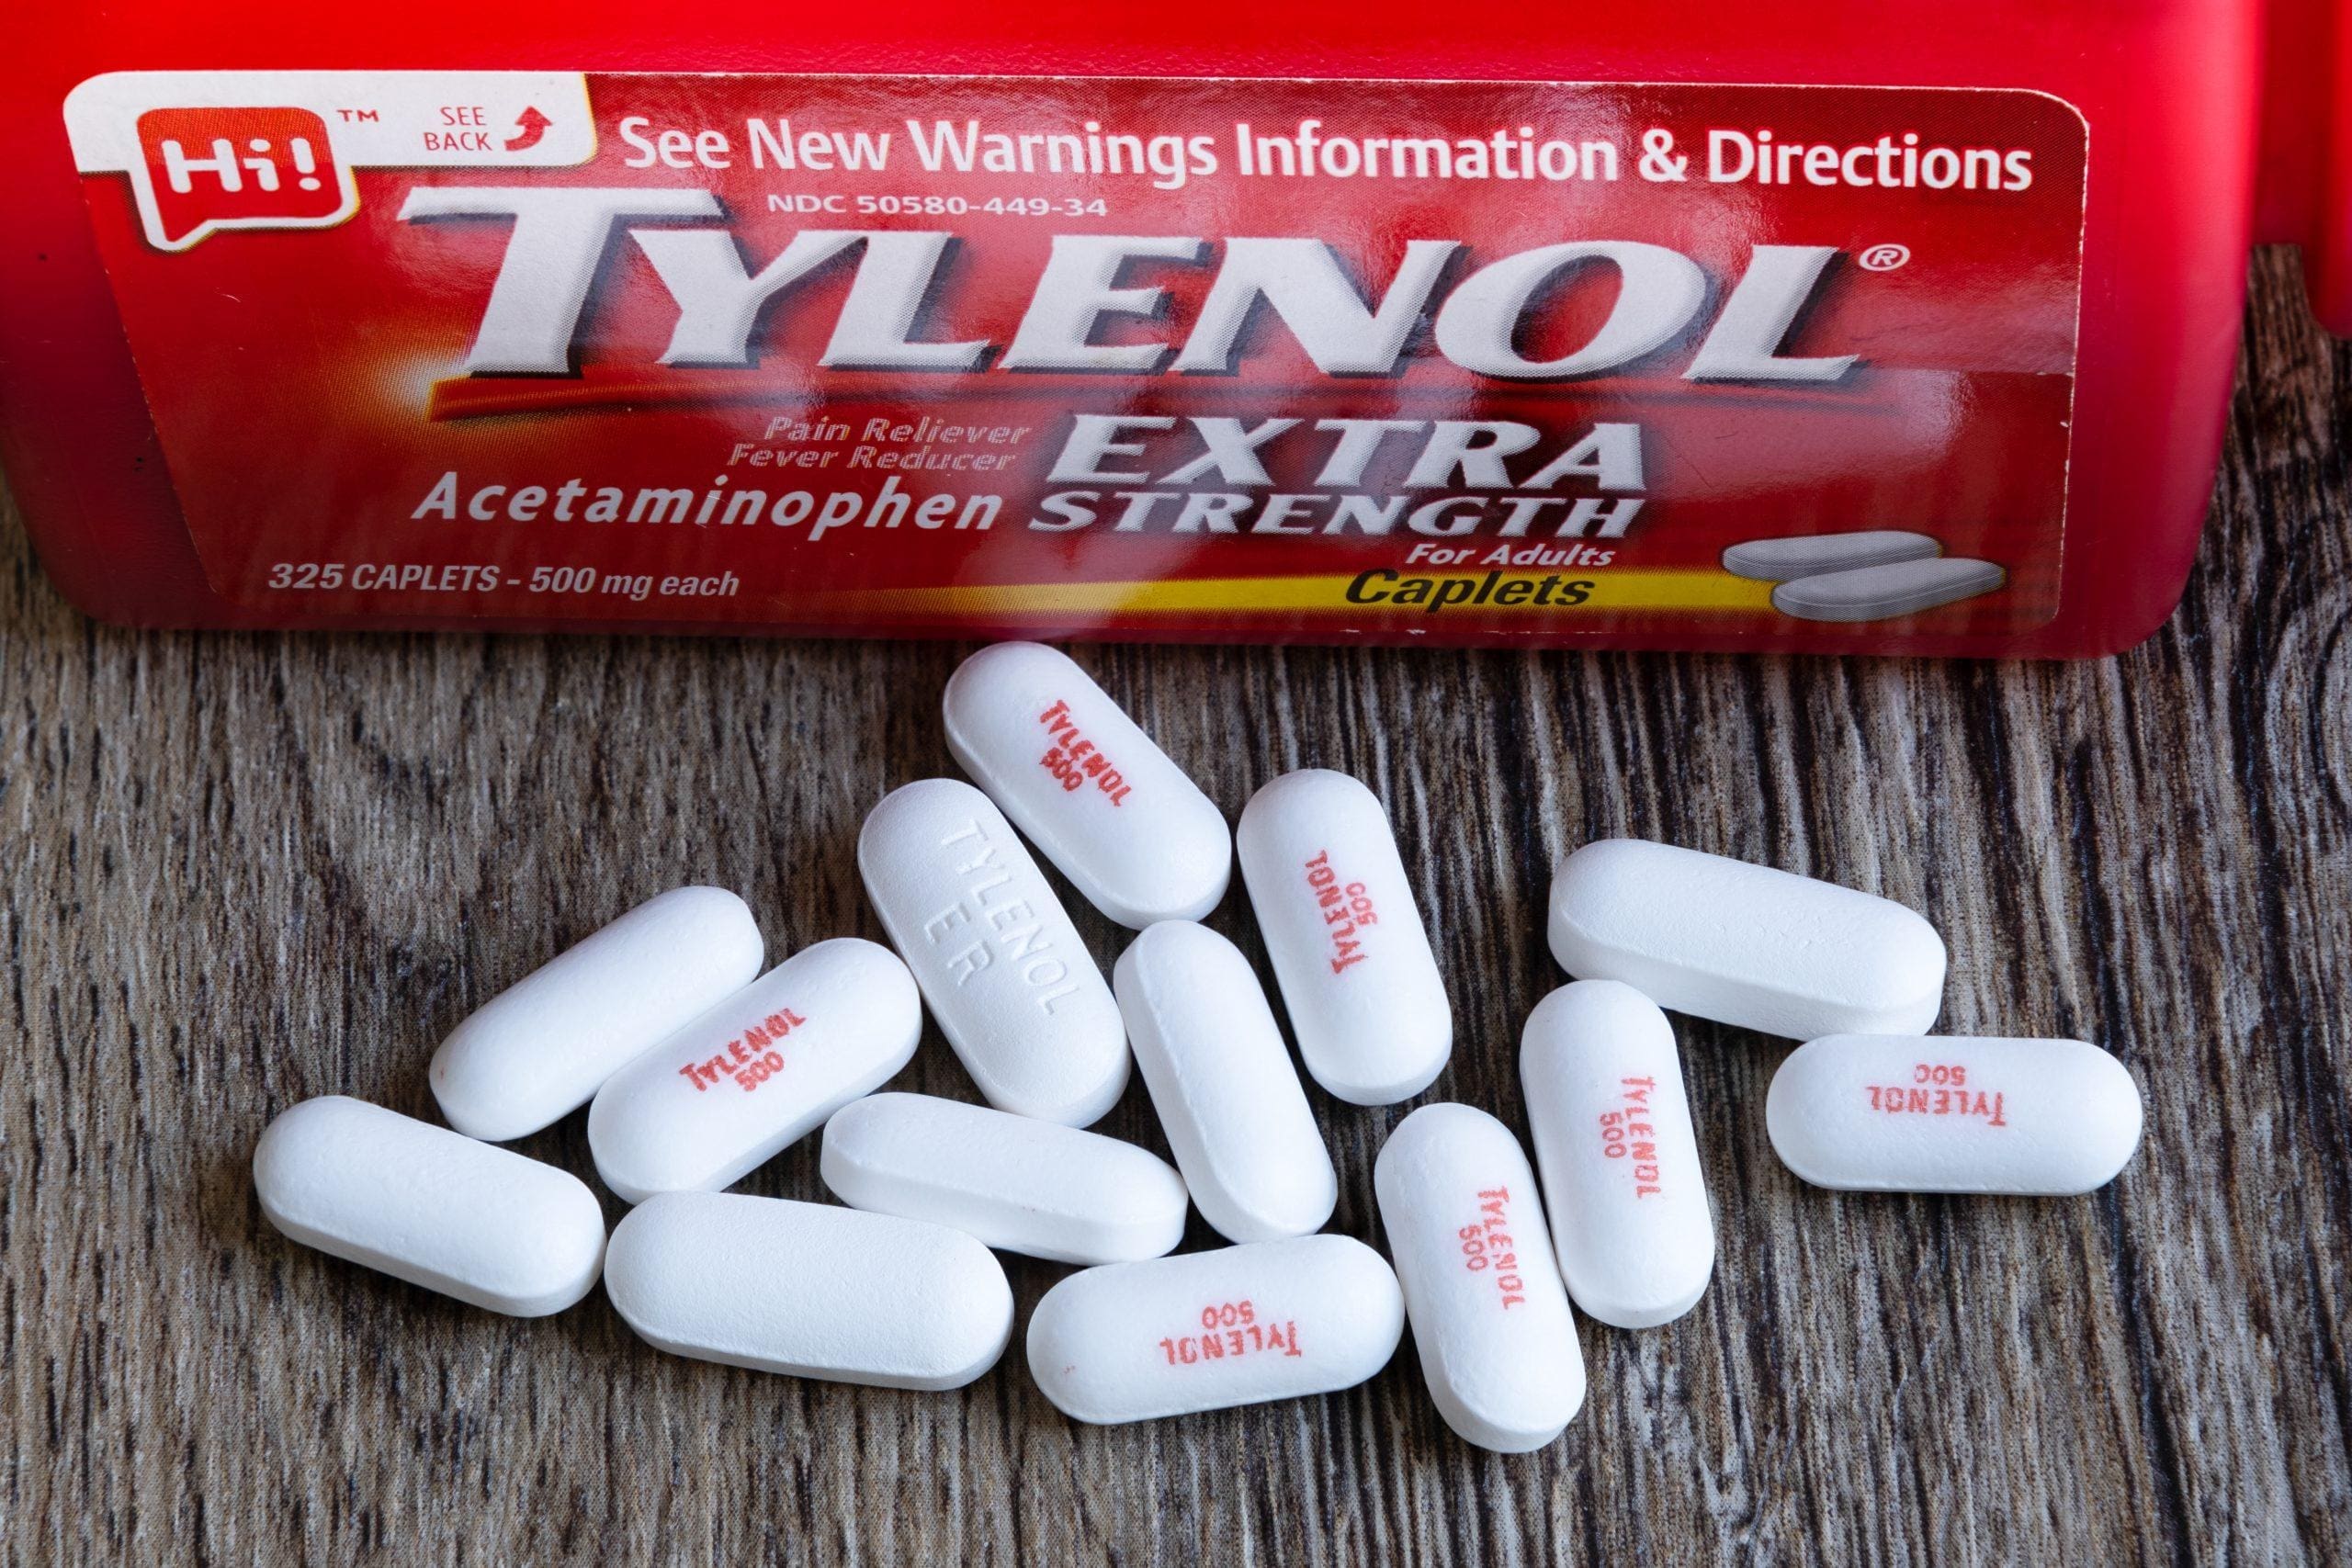 Tylenol During Pregnancy Was Not Safe And Could Lead To Autism